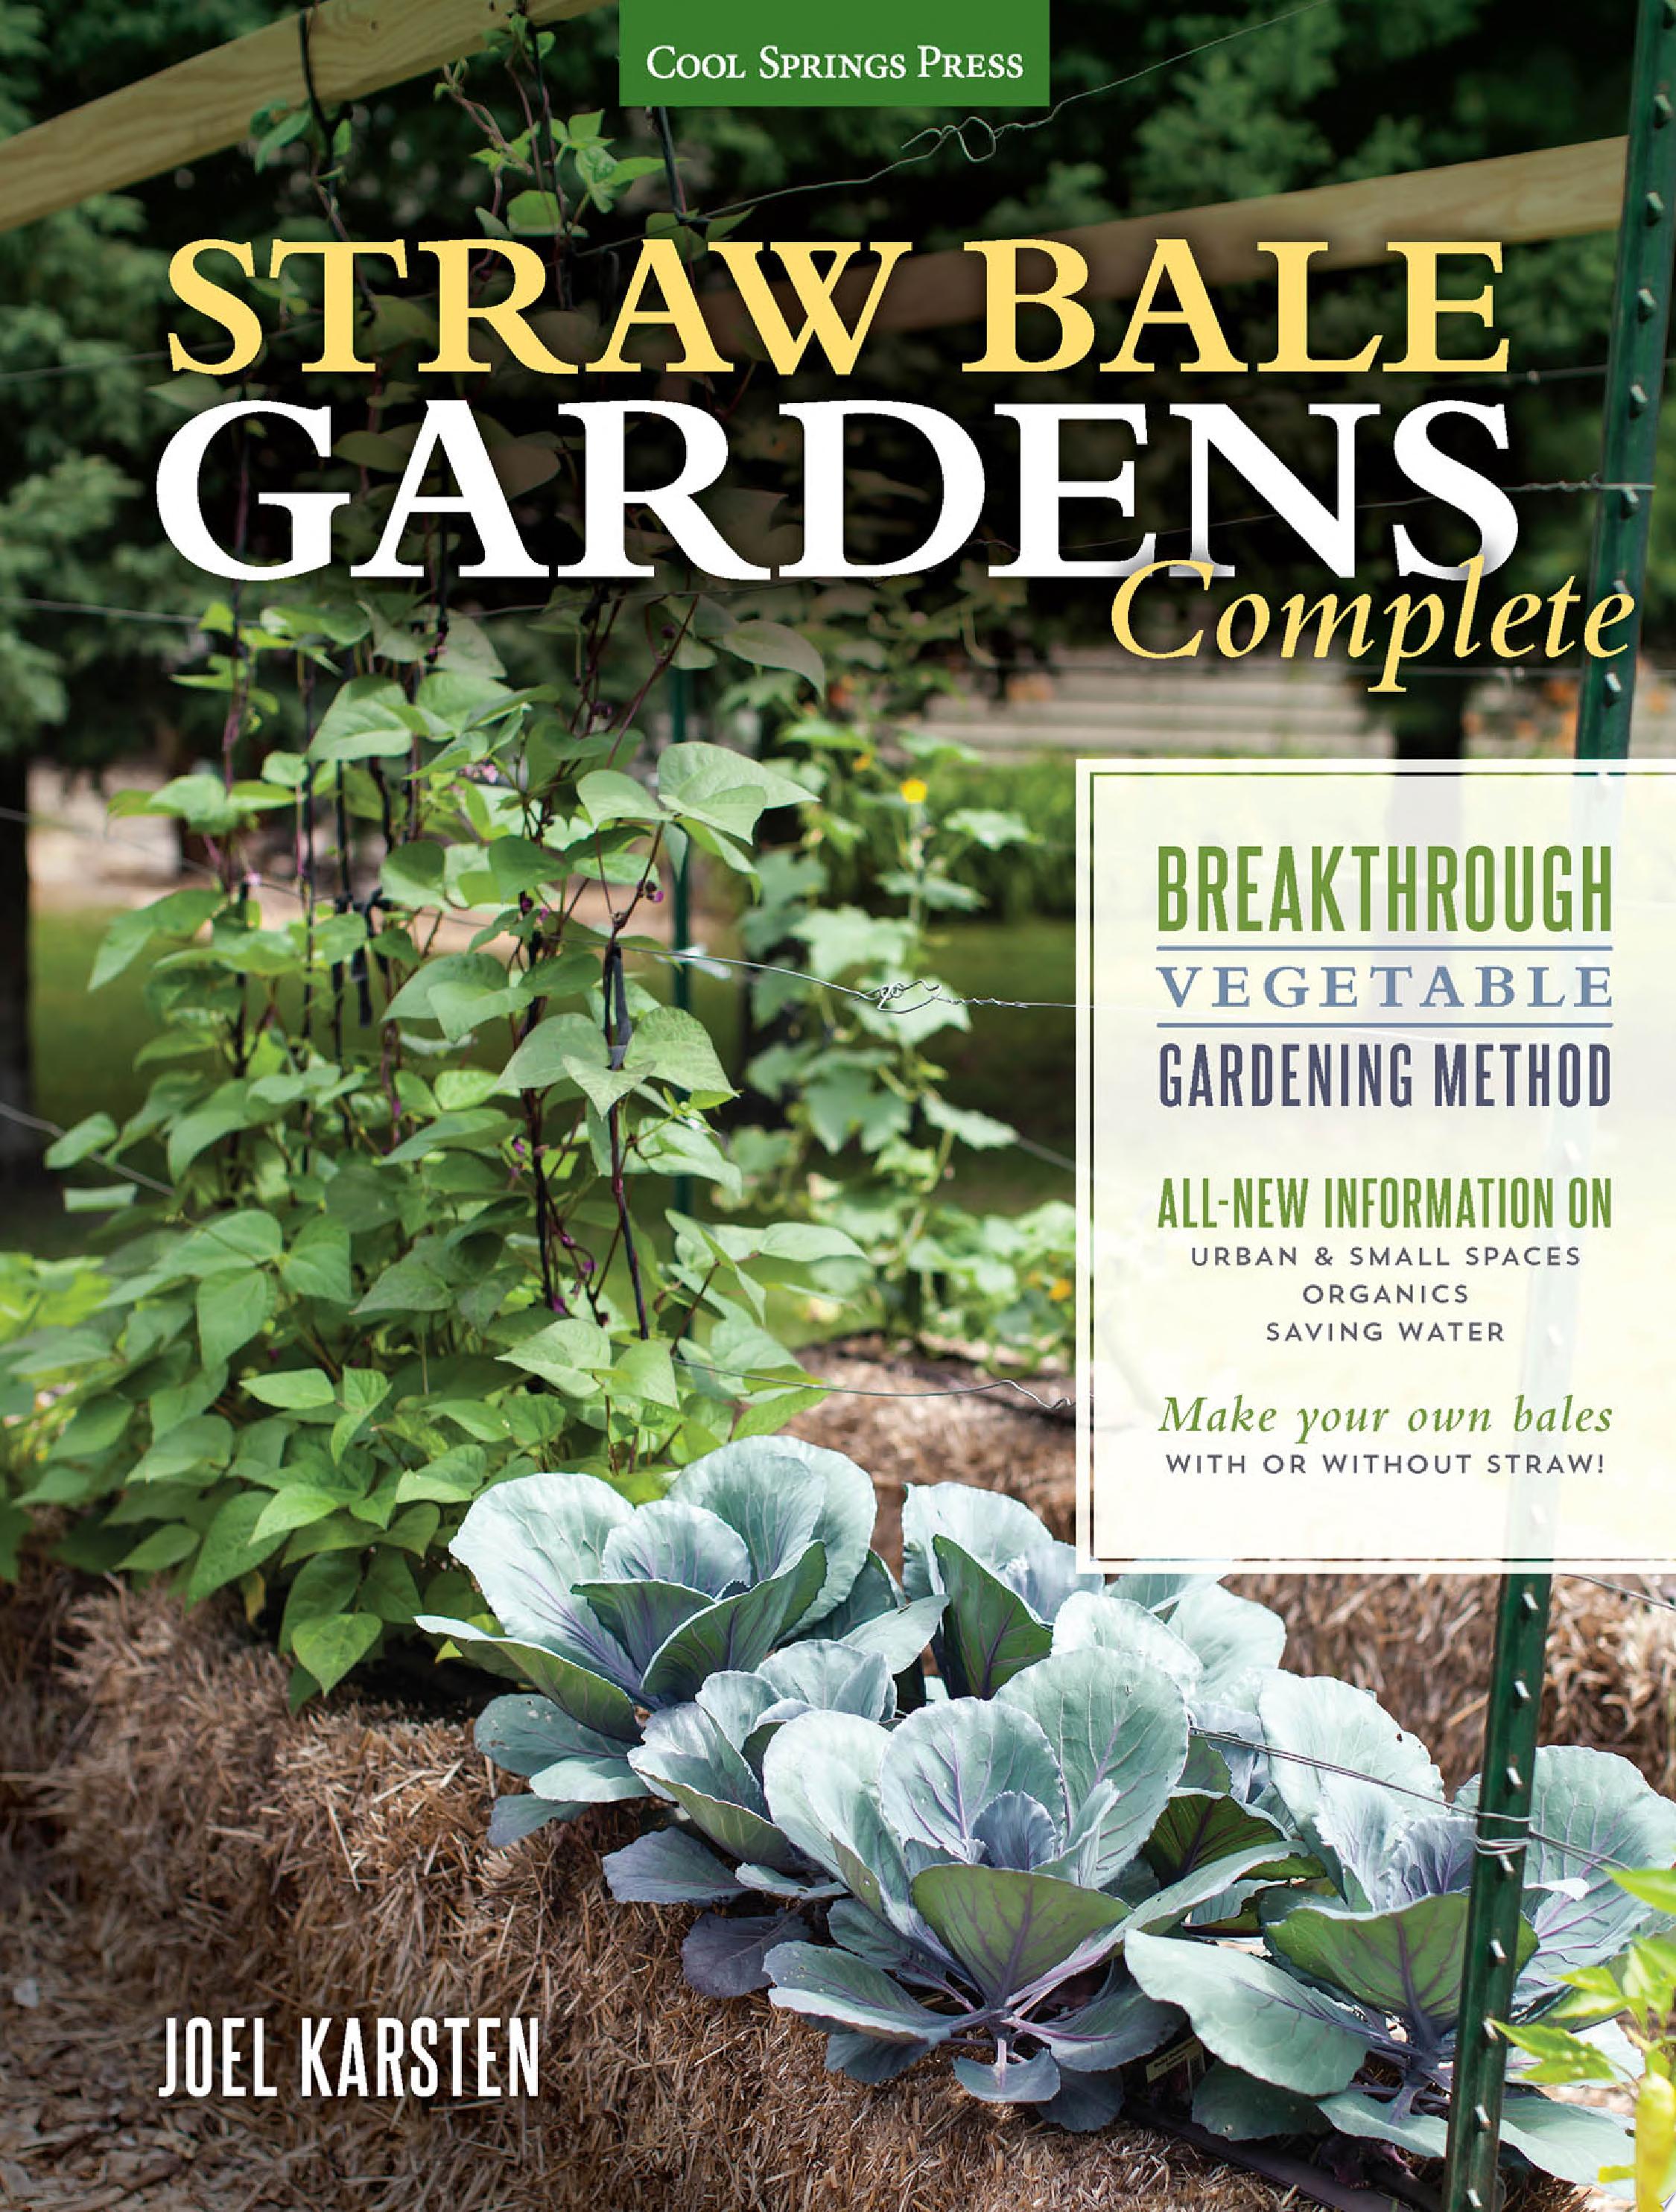 Image for "Straw Bale Gardens Complete"